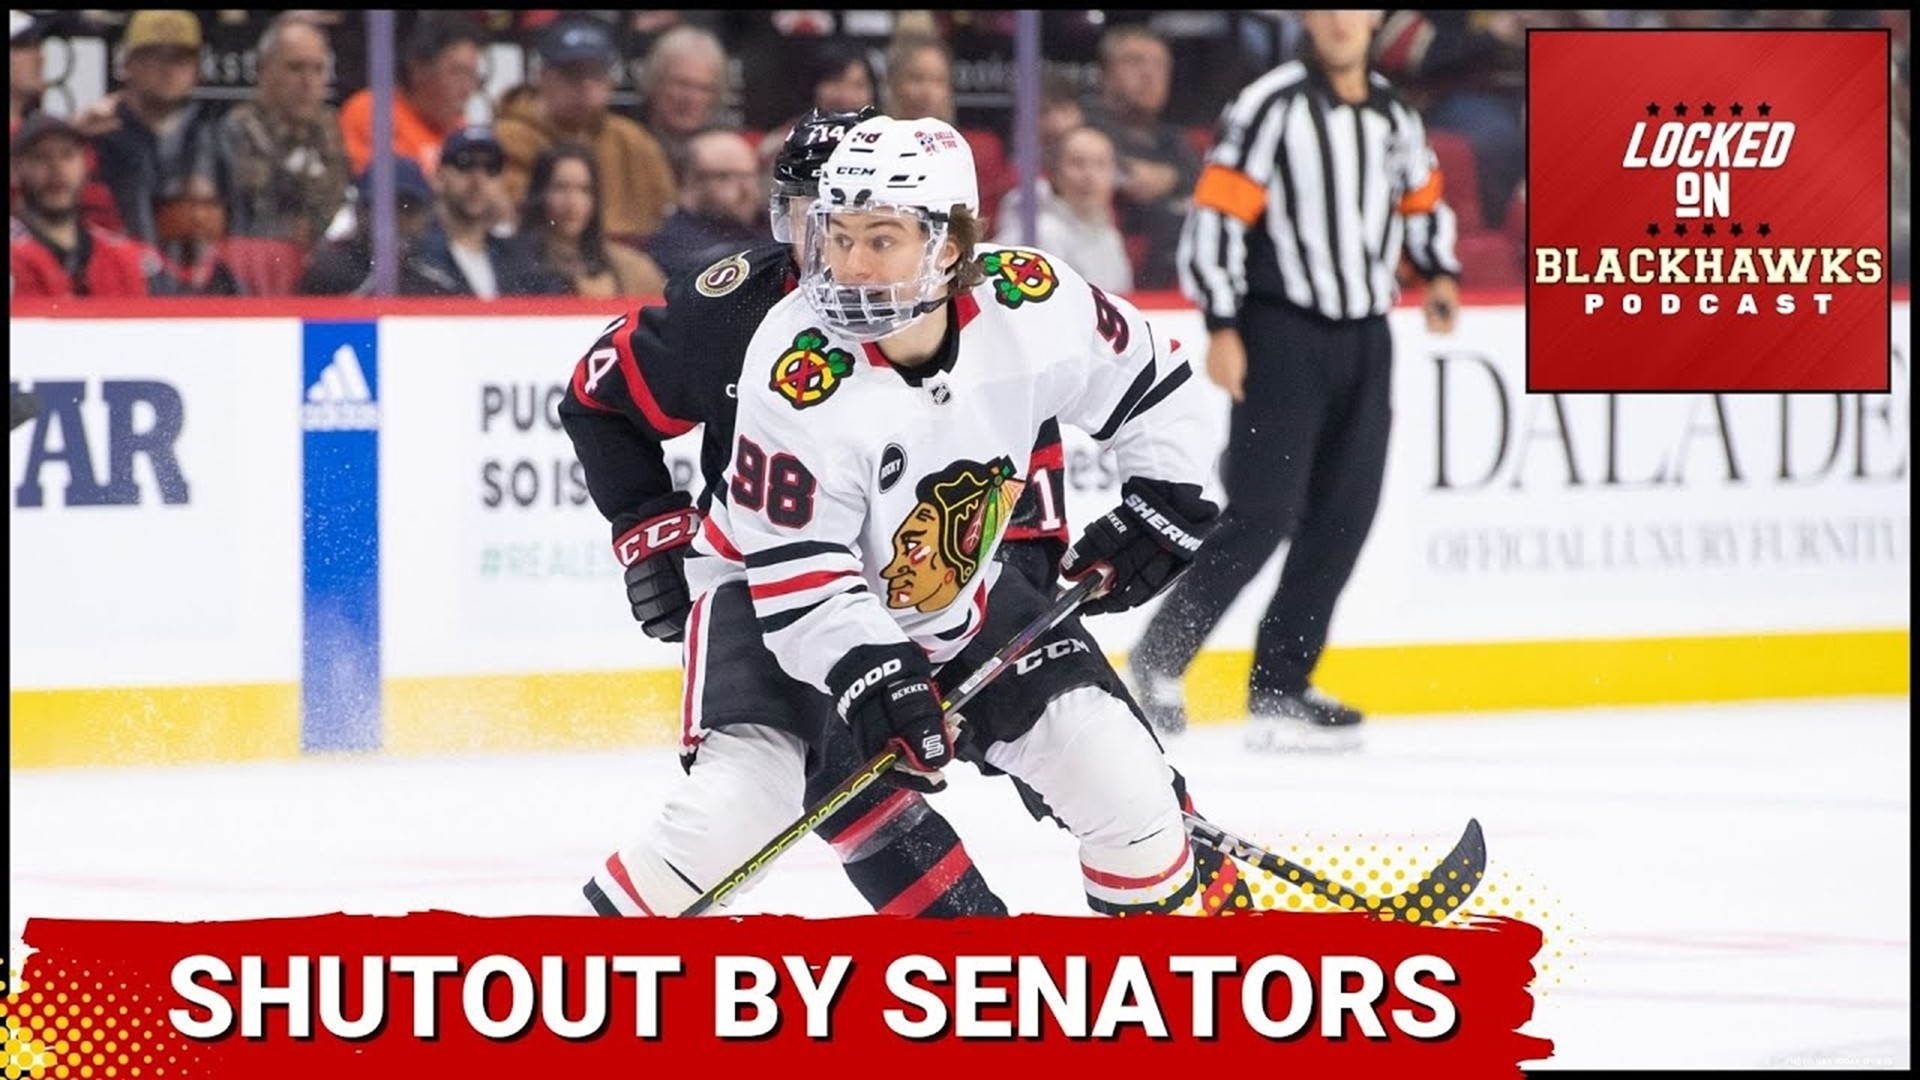 Friday's episode begins with a recap of the Chicago Blackhawks' lackluster 2-0 defeat to the Ottawa Senators.